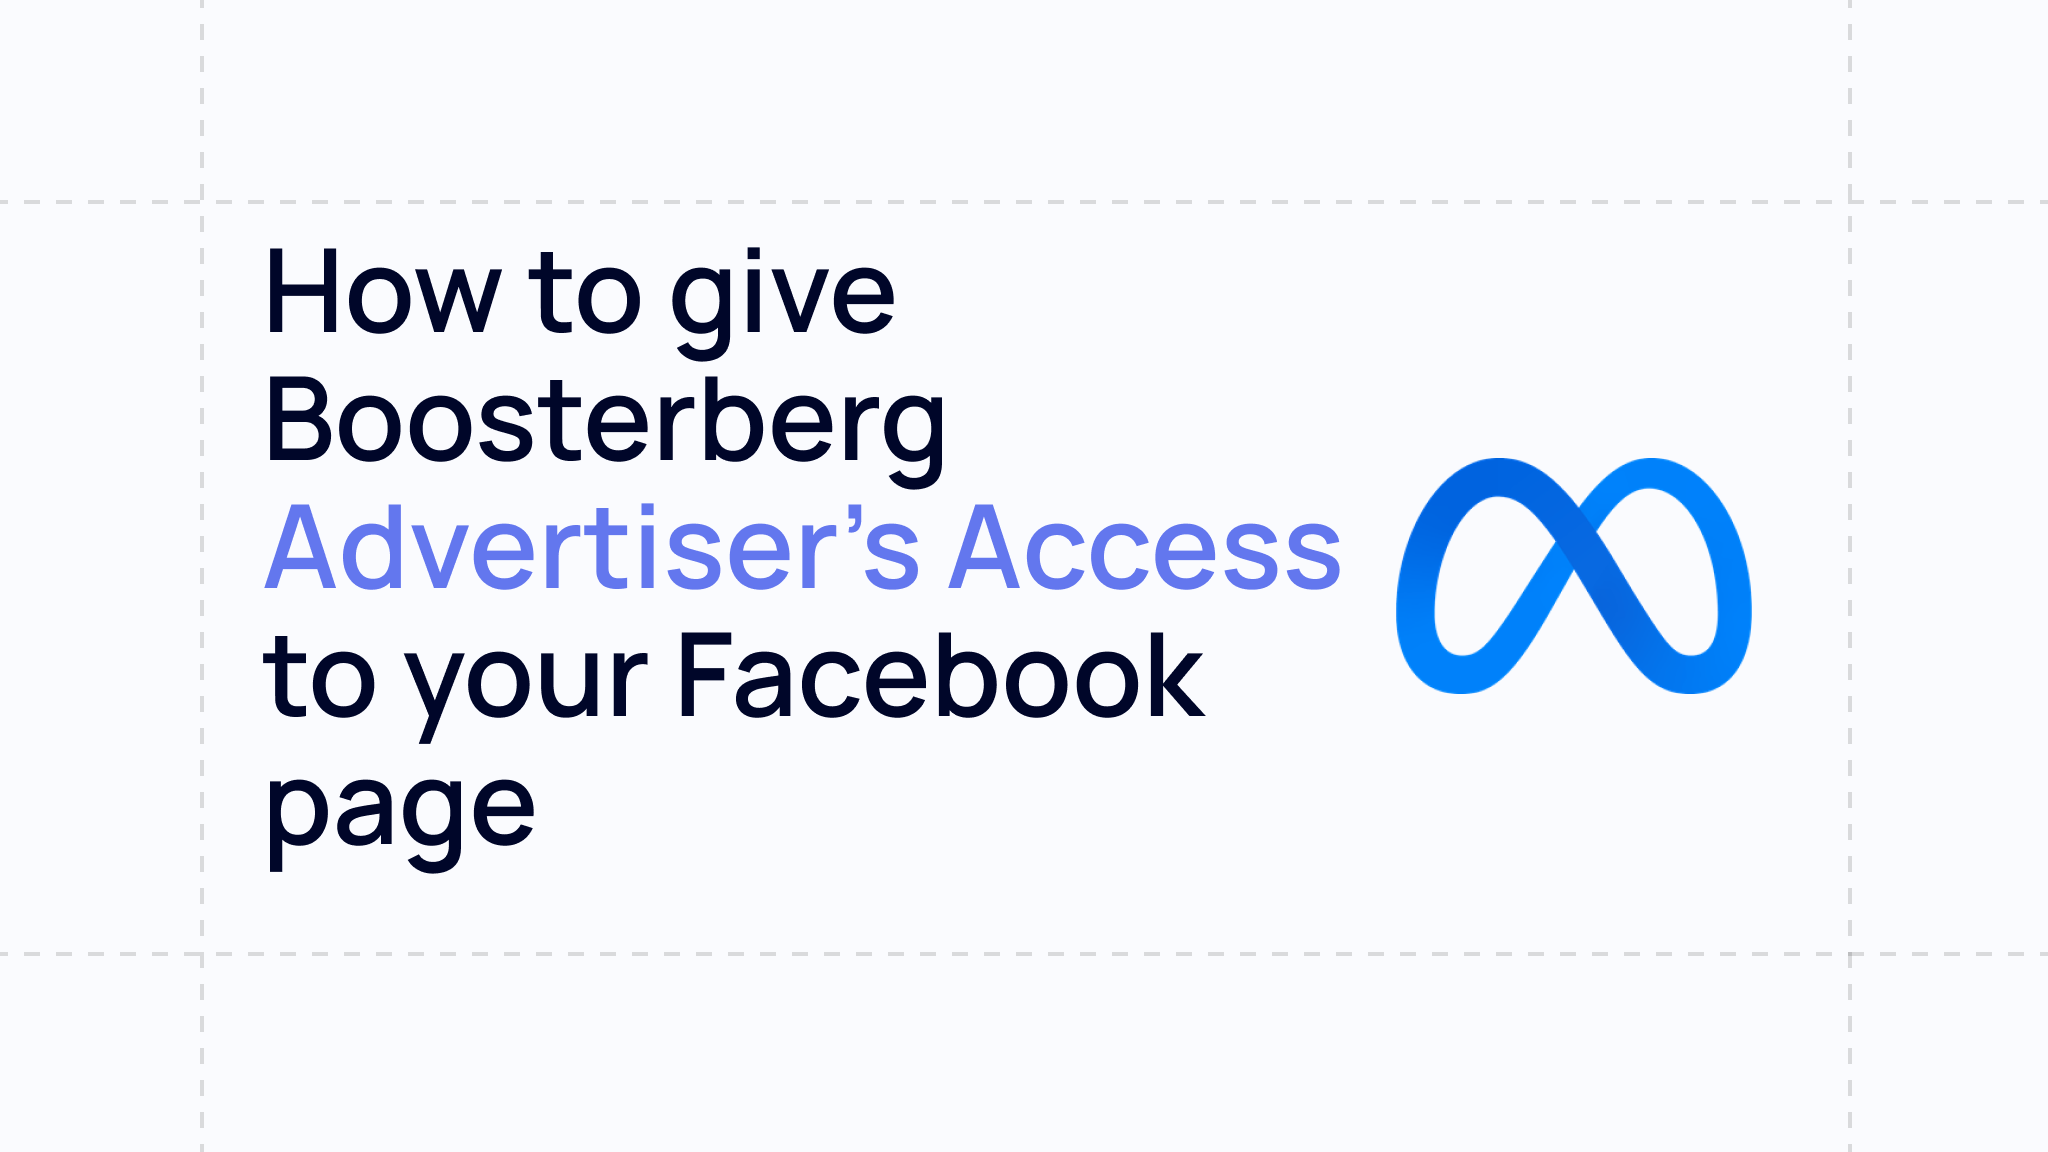 Boosterberg Presets: How to give Boosterberg Advertiser’s Access to your Facebook page